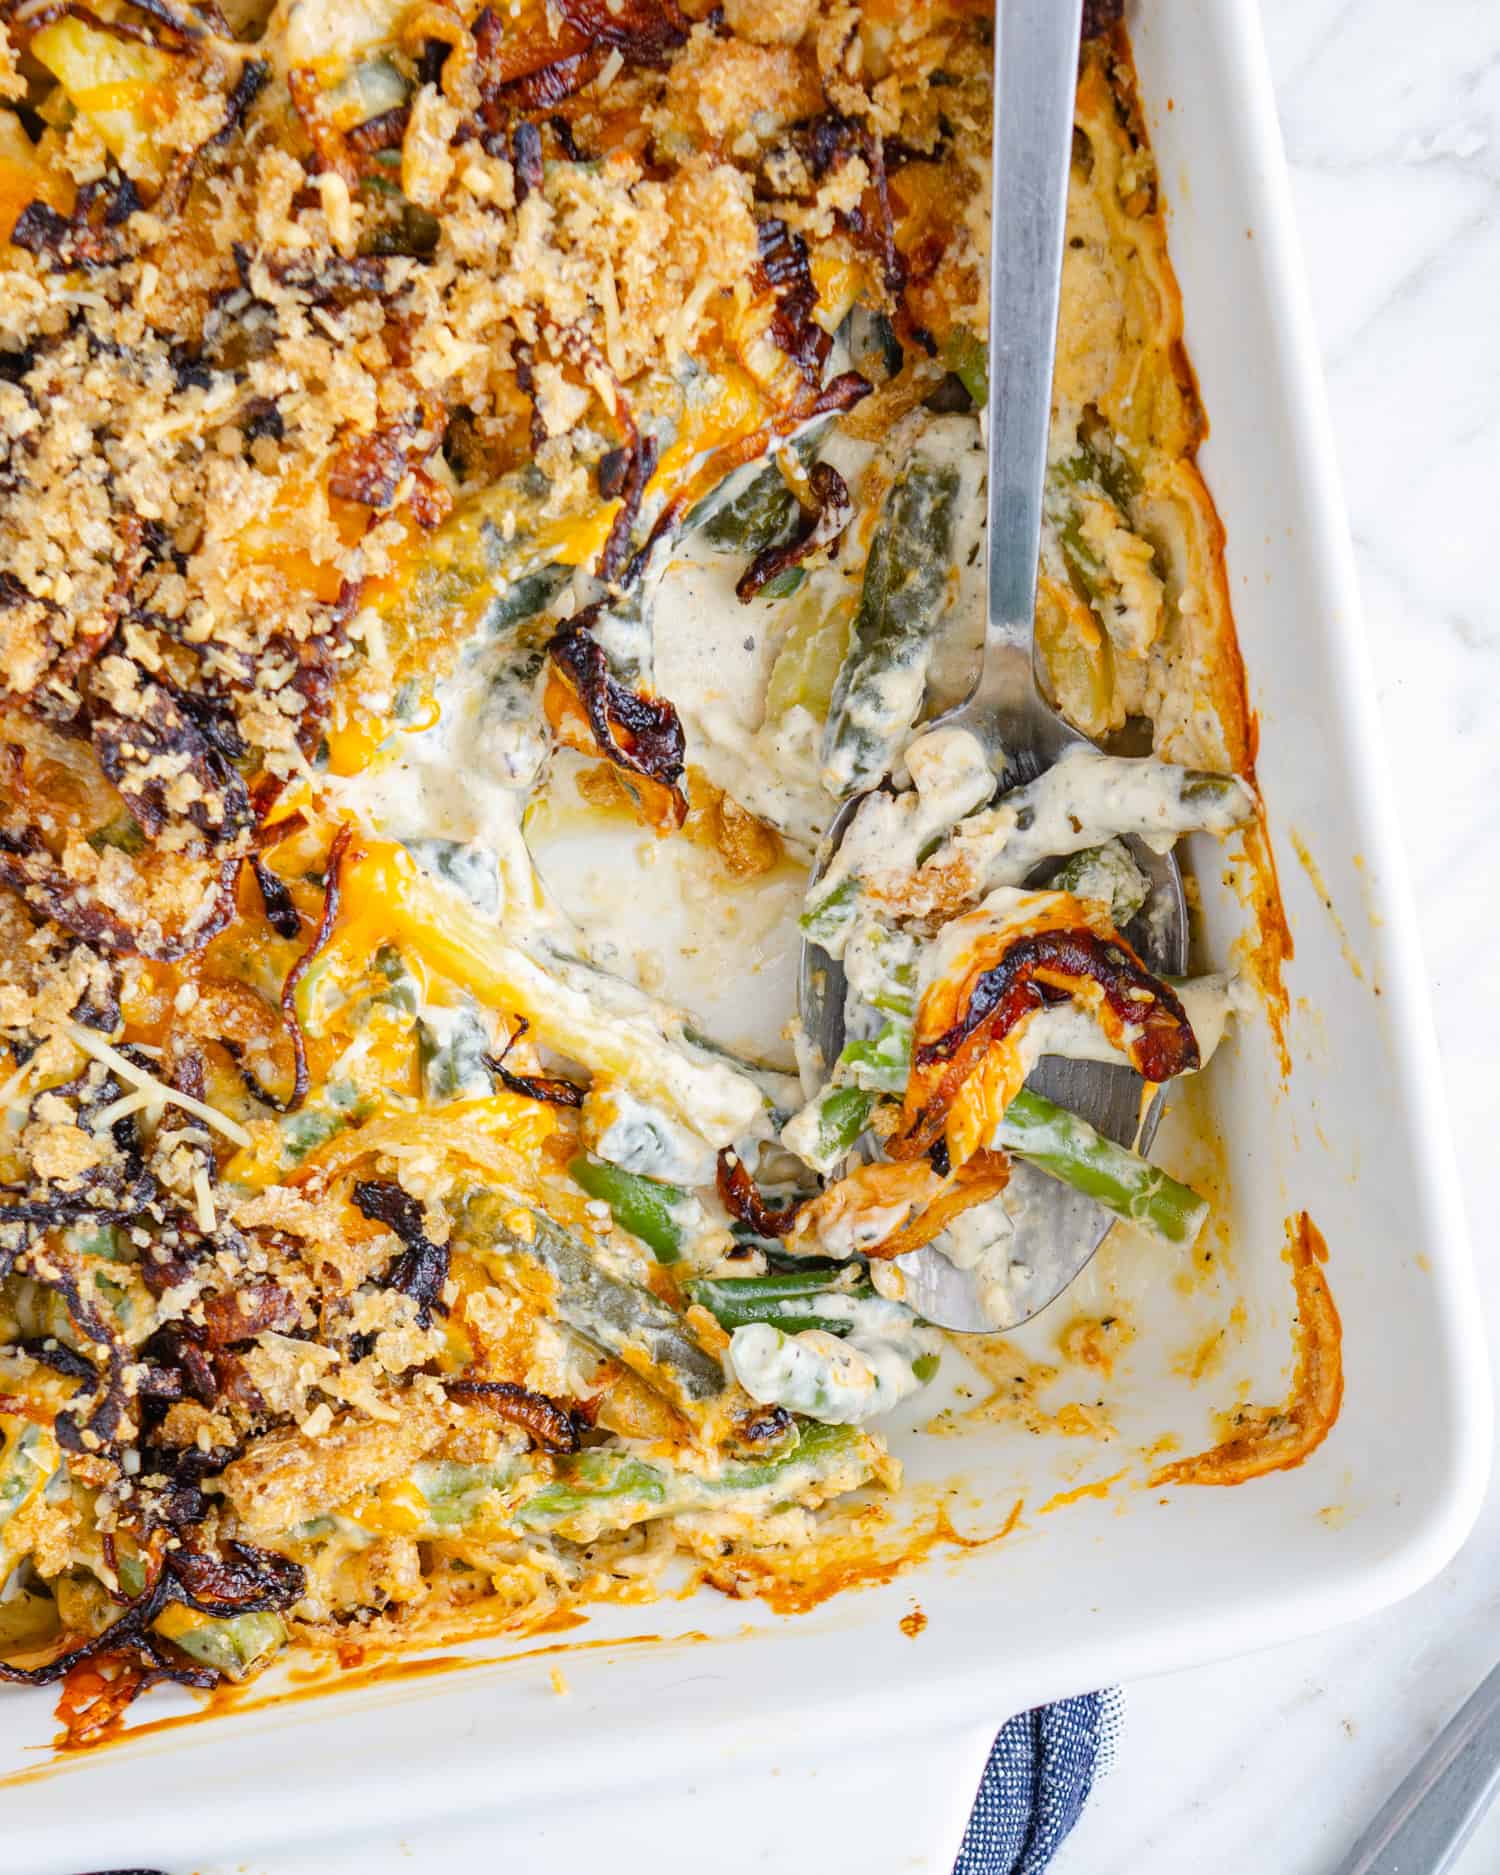 Keto green bean casserole in a white square serving dish with a scoop taken out showing the tender and green beans and cream cheese filling in the middle.